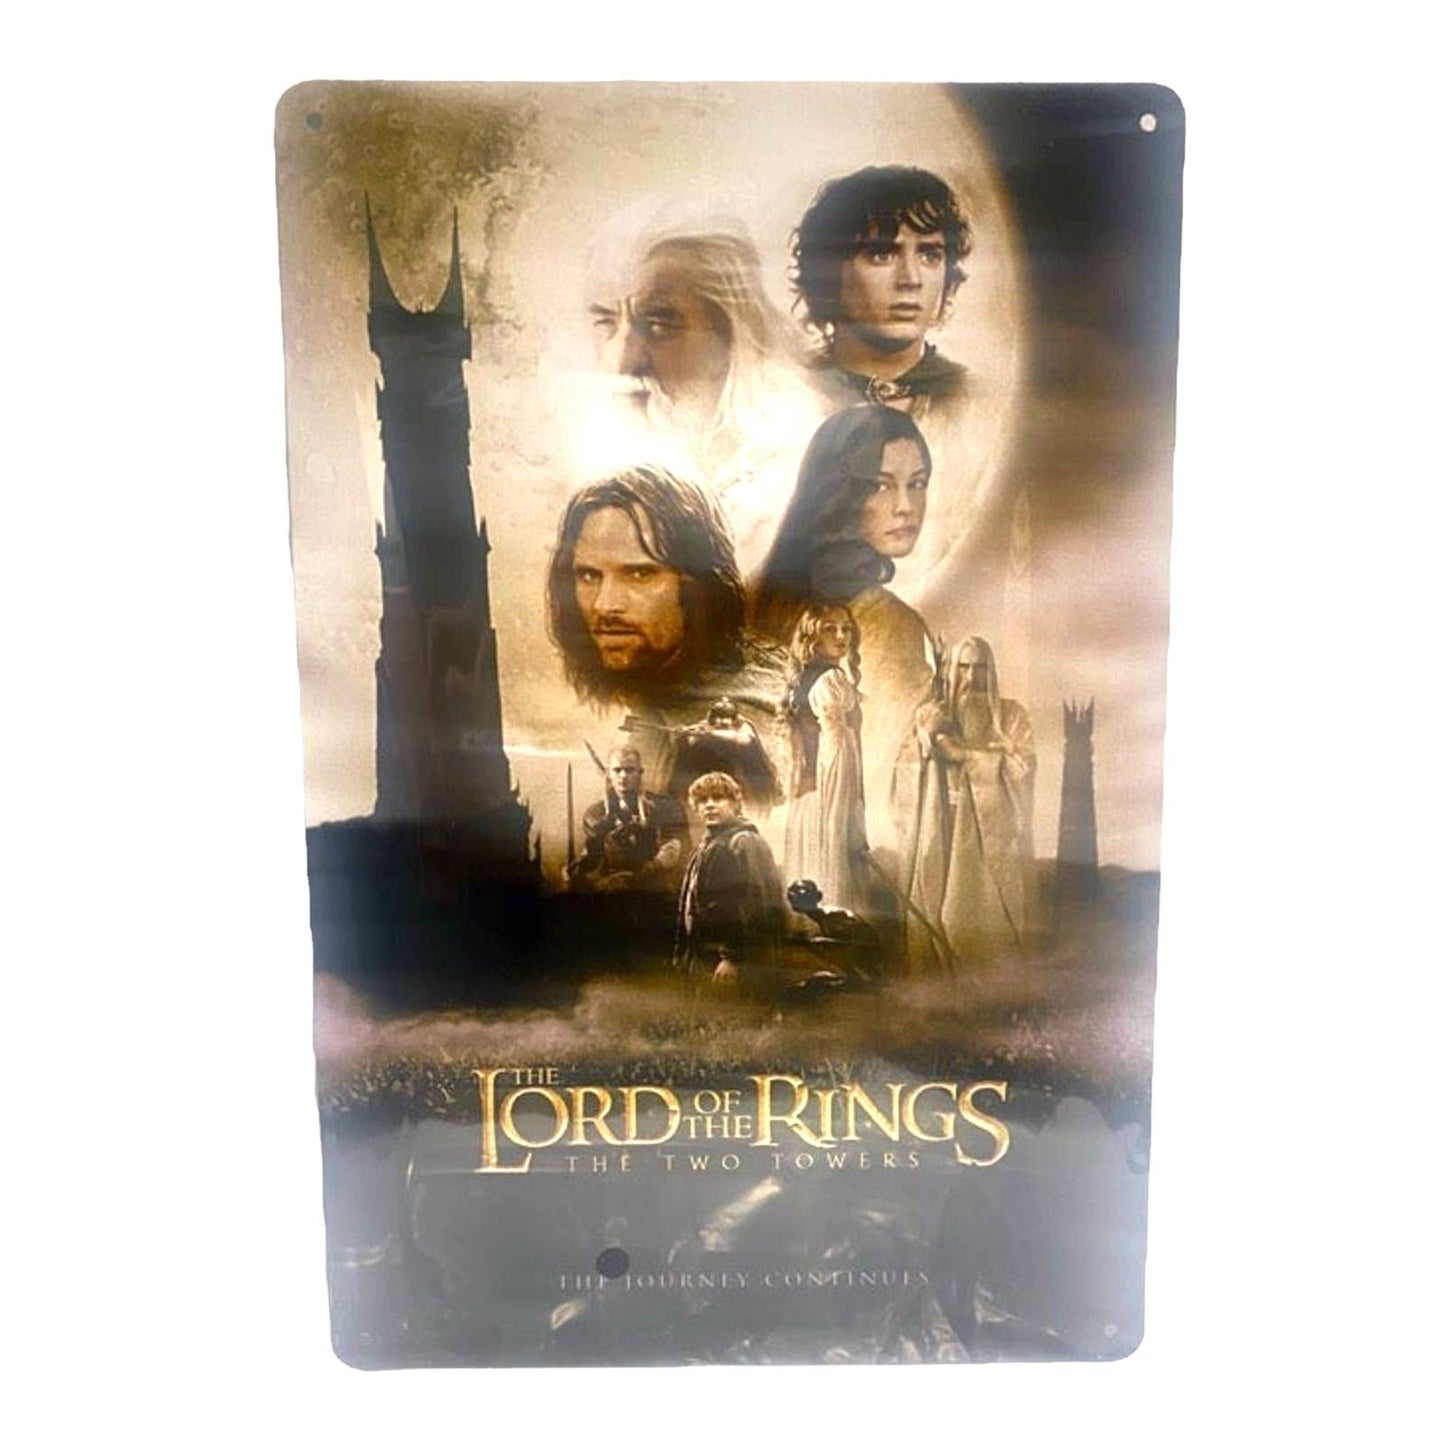 The Lord of the Rings: Motion Pictures Trilogy - 3 Movies Collection: The  Fellowship of the Ring + The Two Towers + The Return of the King (3-Disc  Box Set) Price in